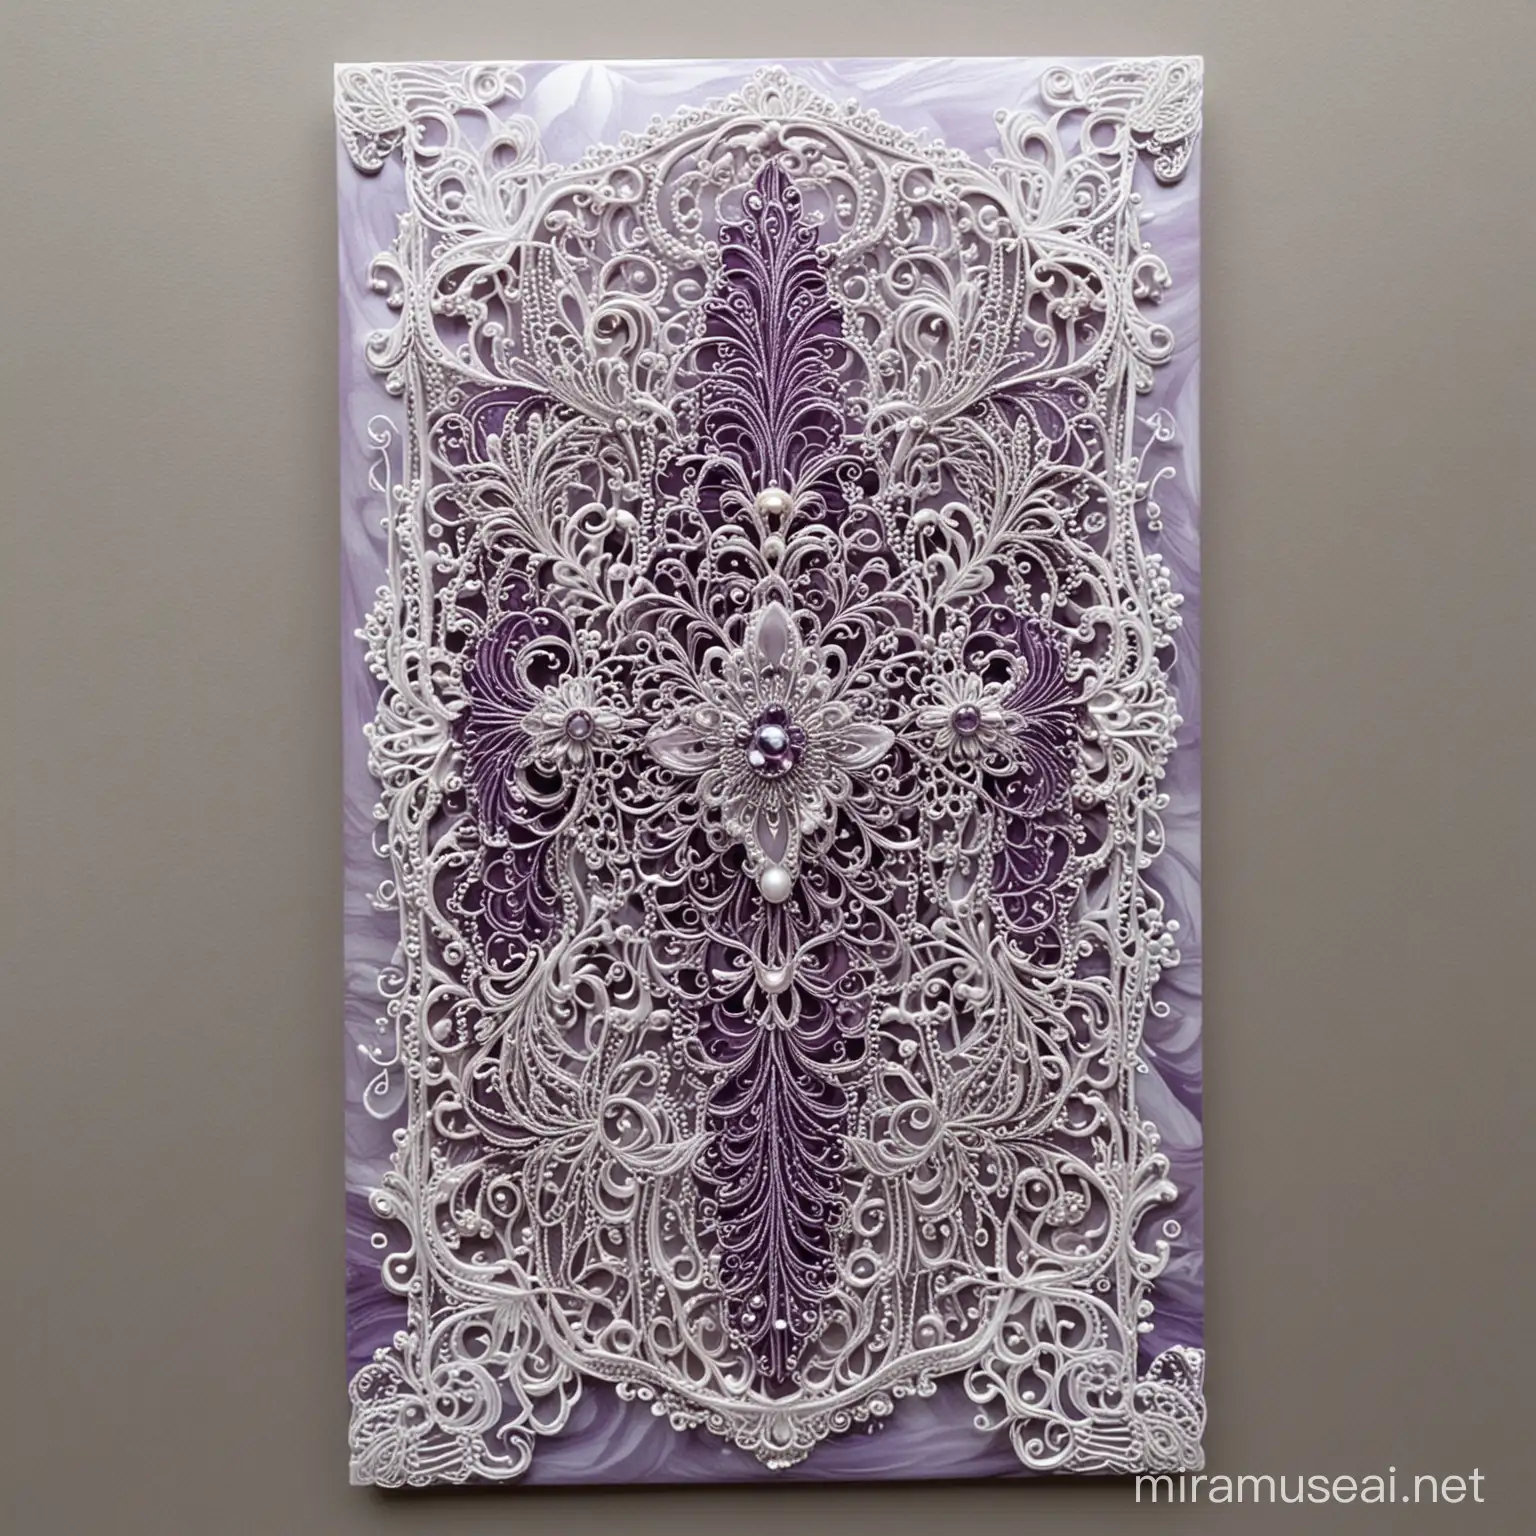 Elegant Purple Mother of Pearl Glitter Art Exquisite Filigree and Lace Detailing